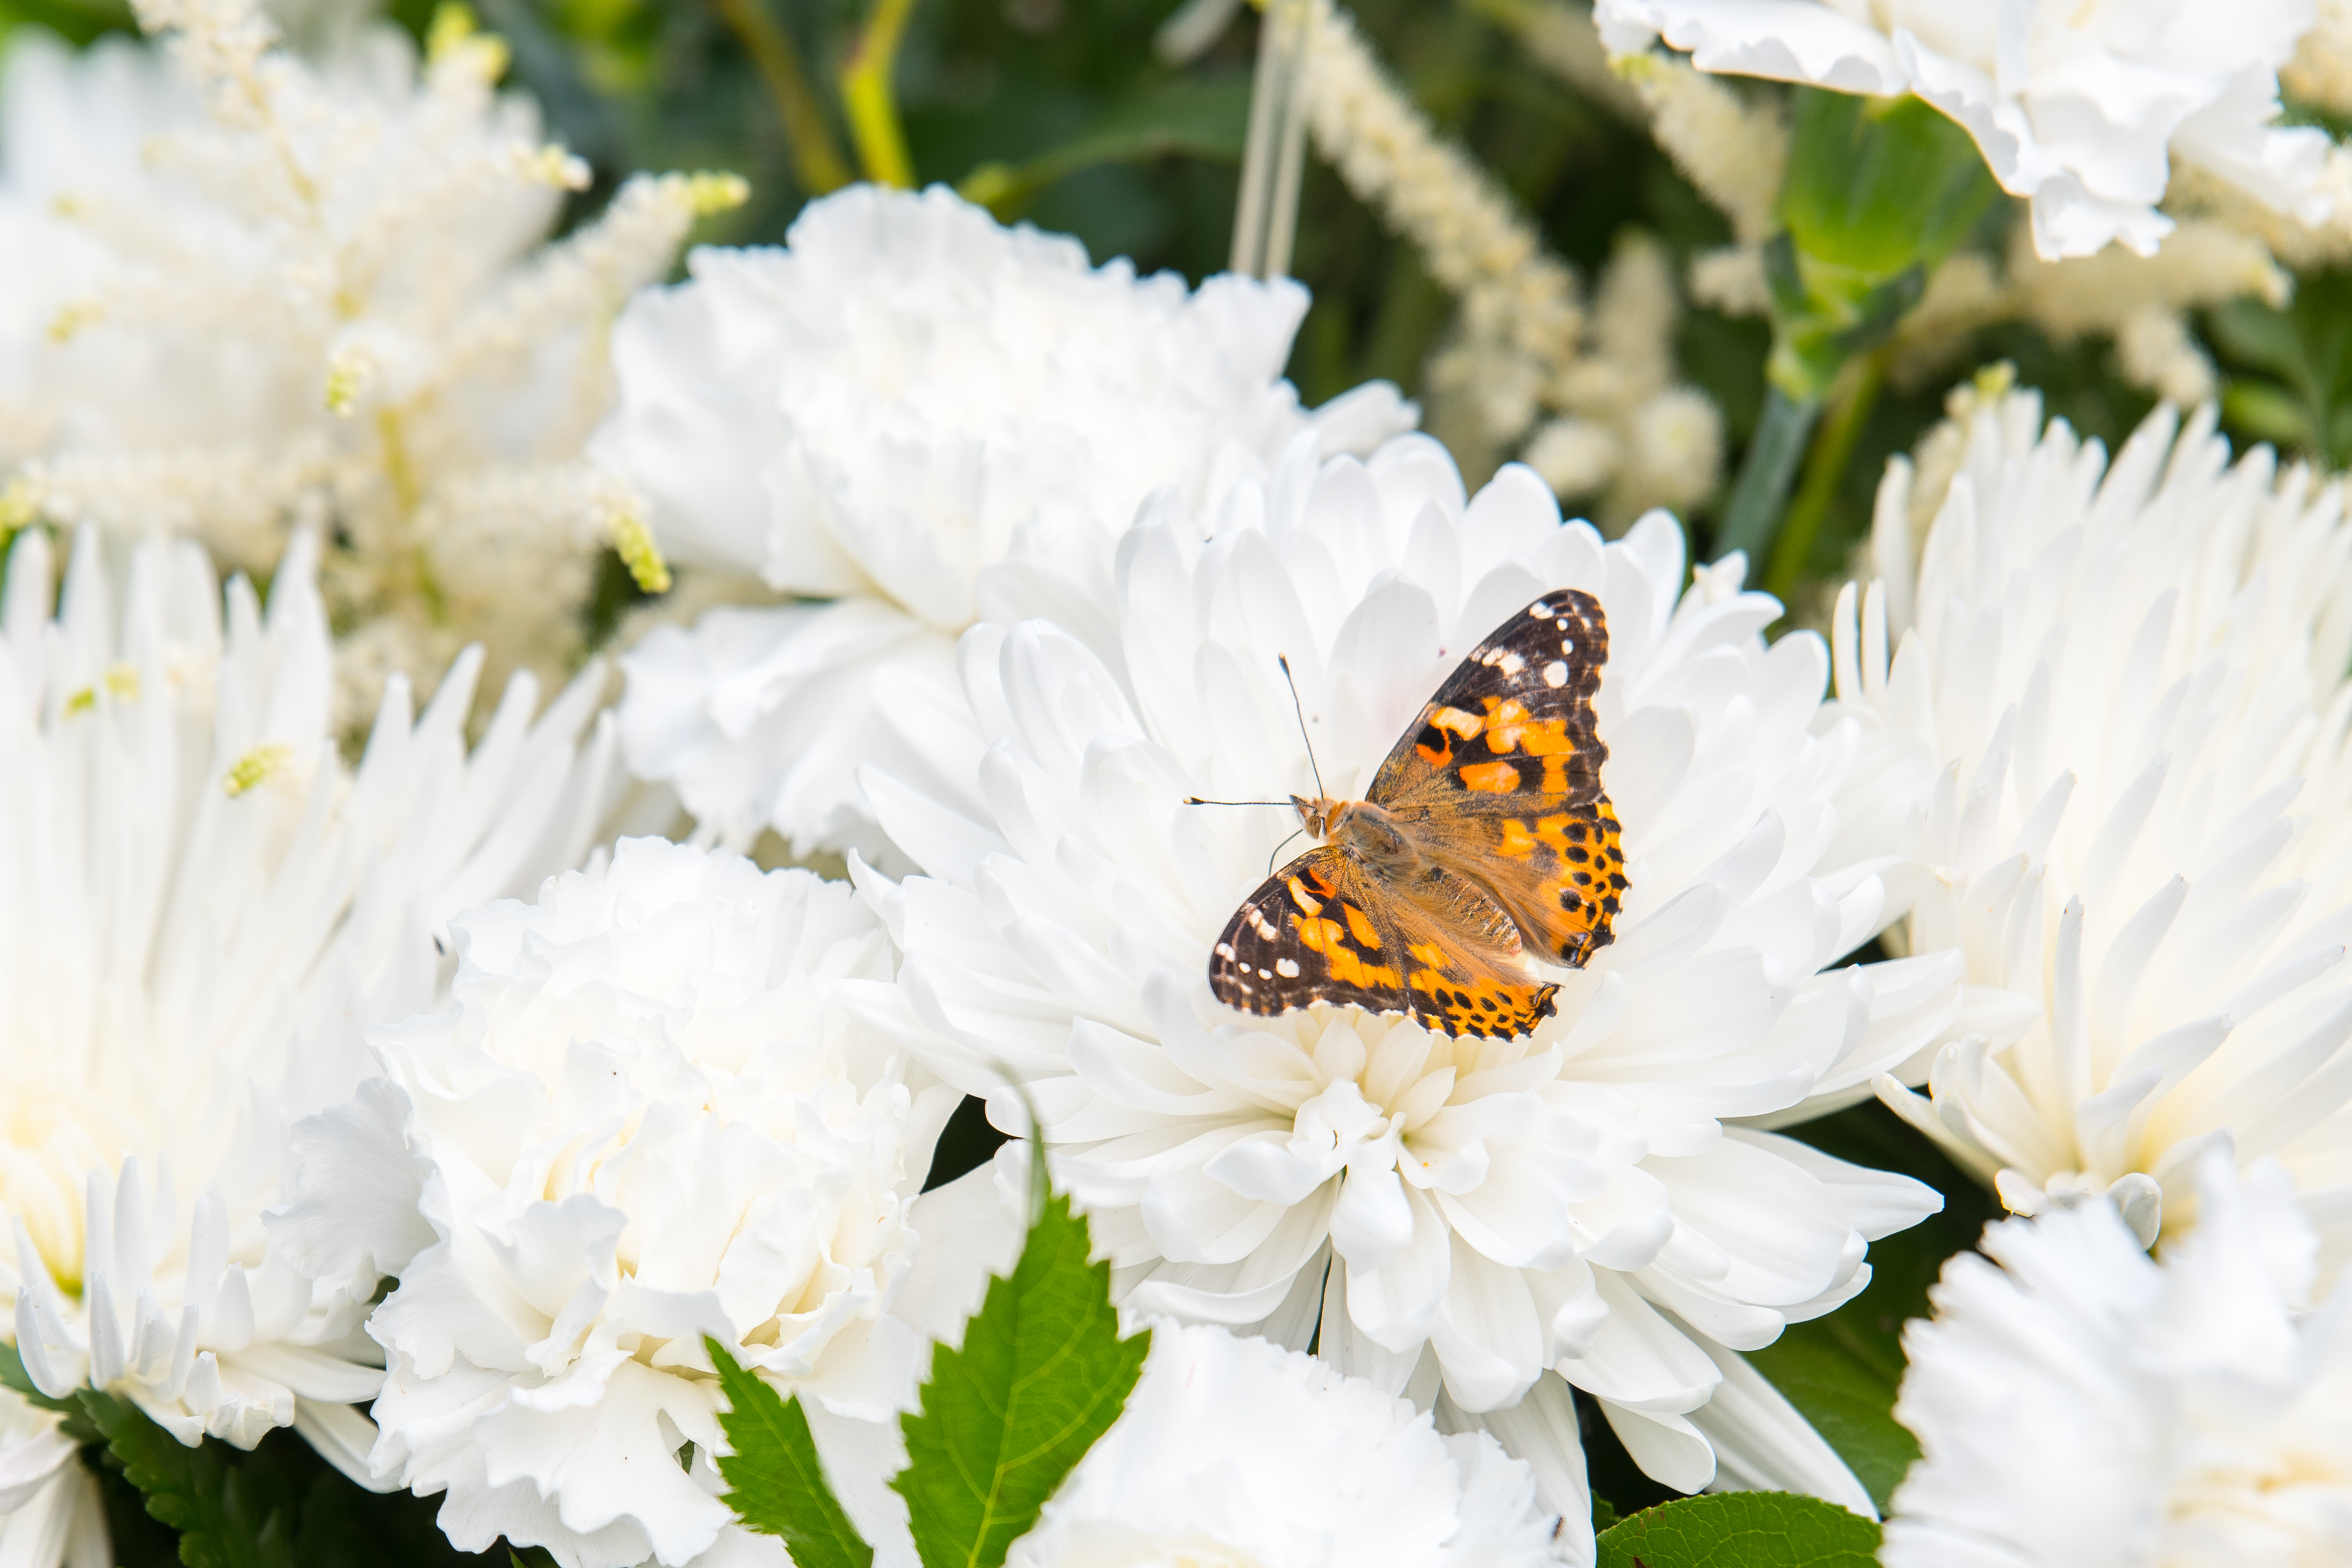 Painted lady butterfly with its wings open sitting on a white flower